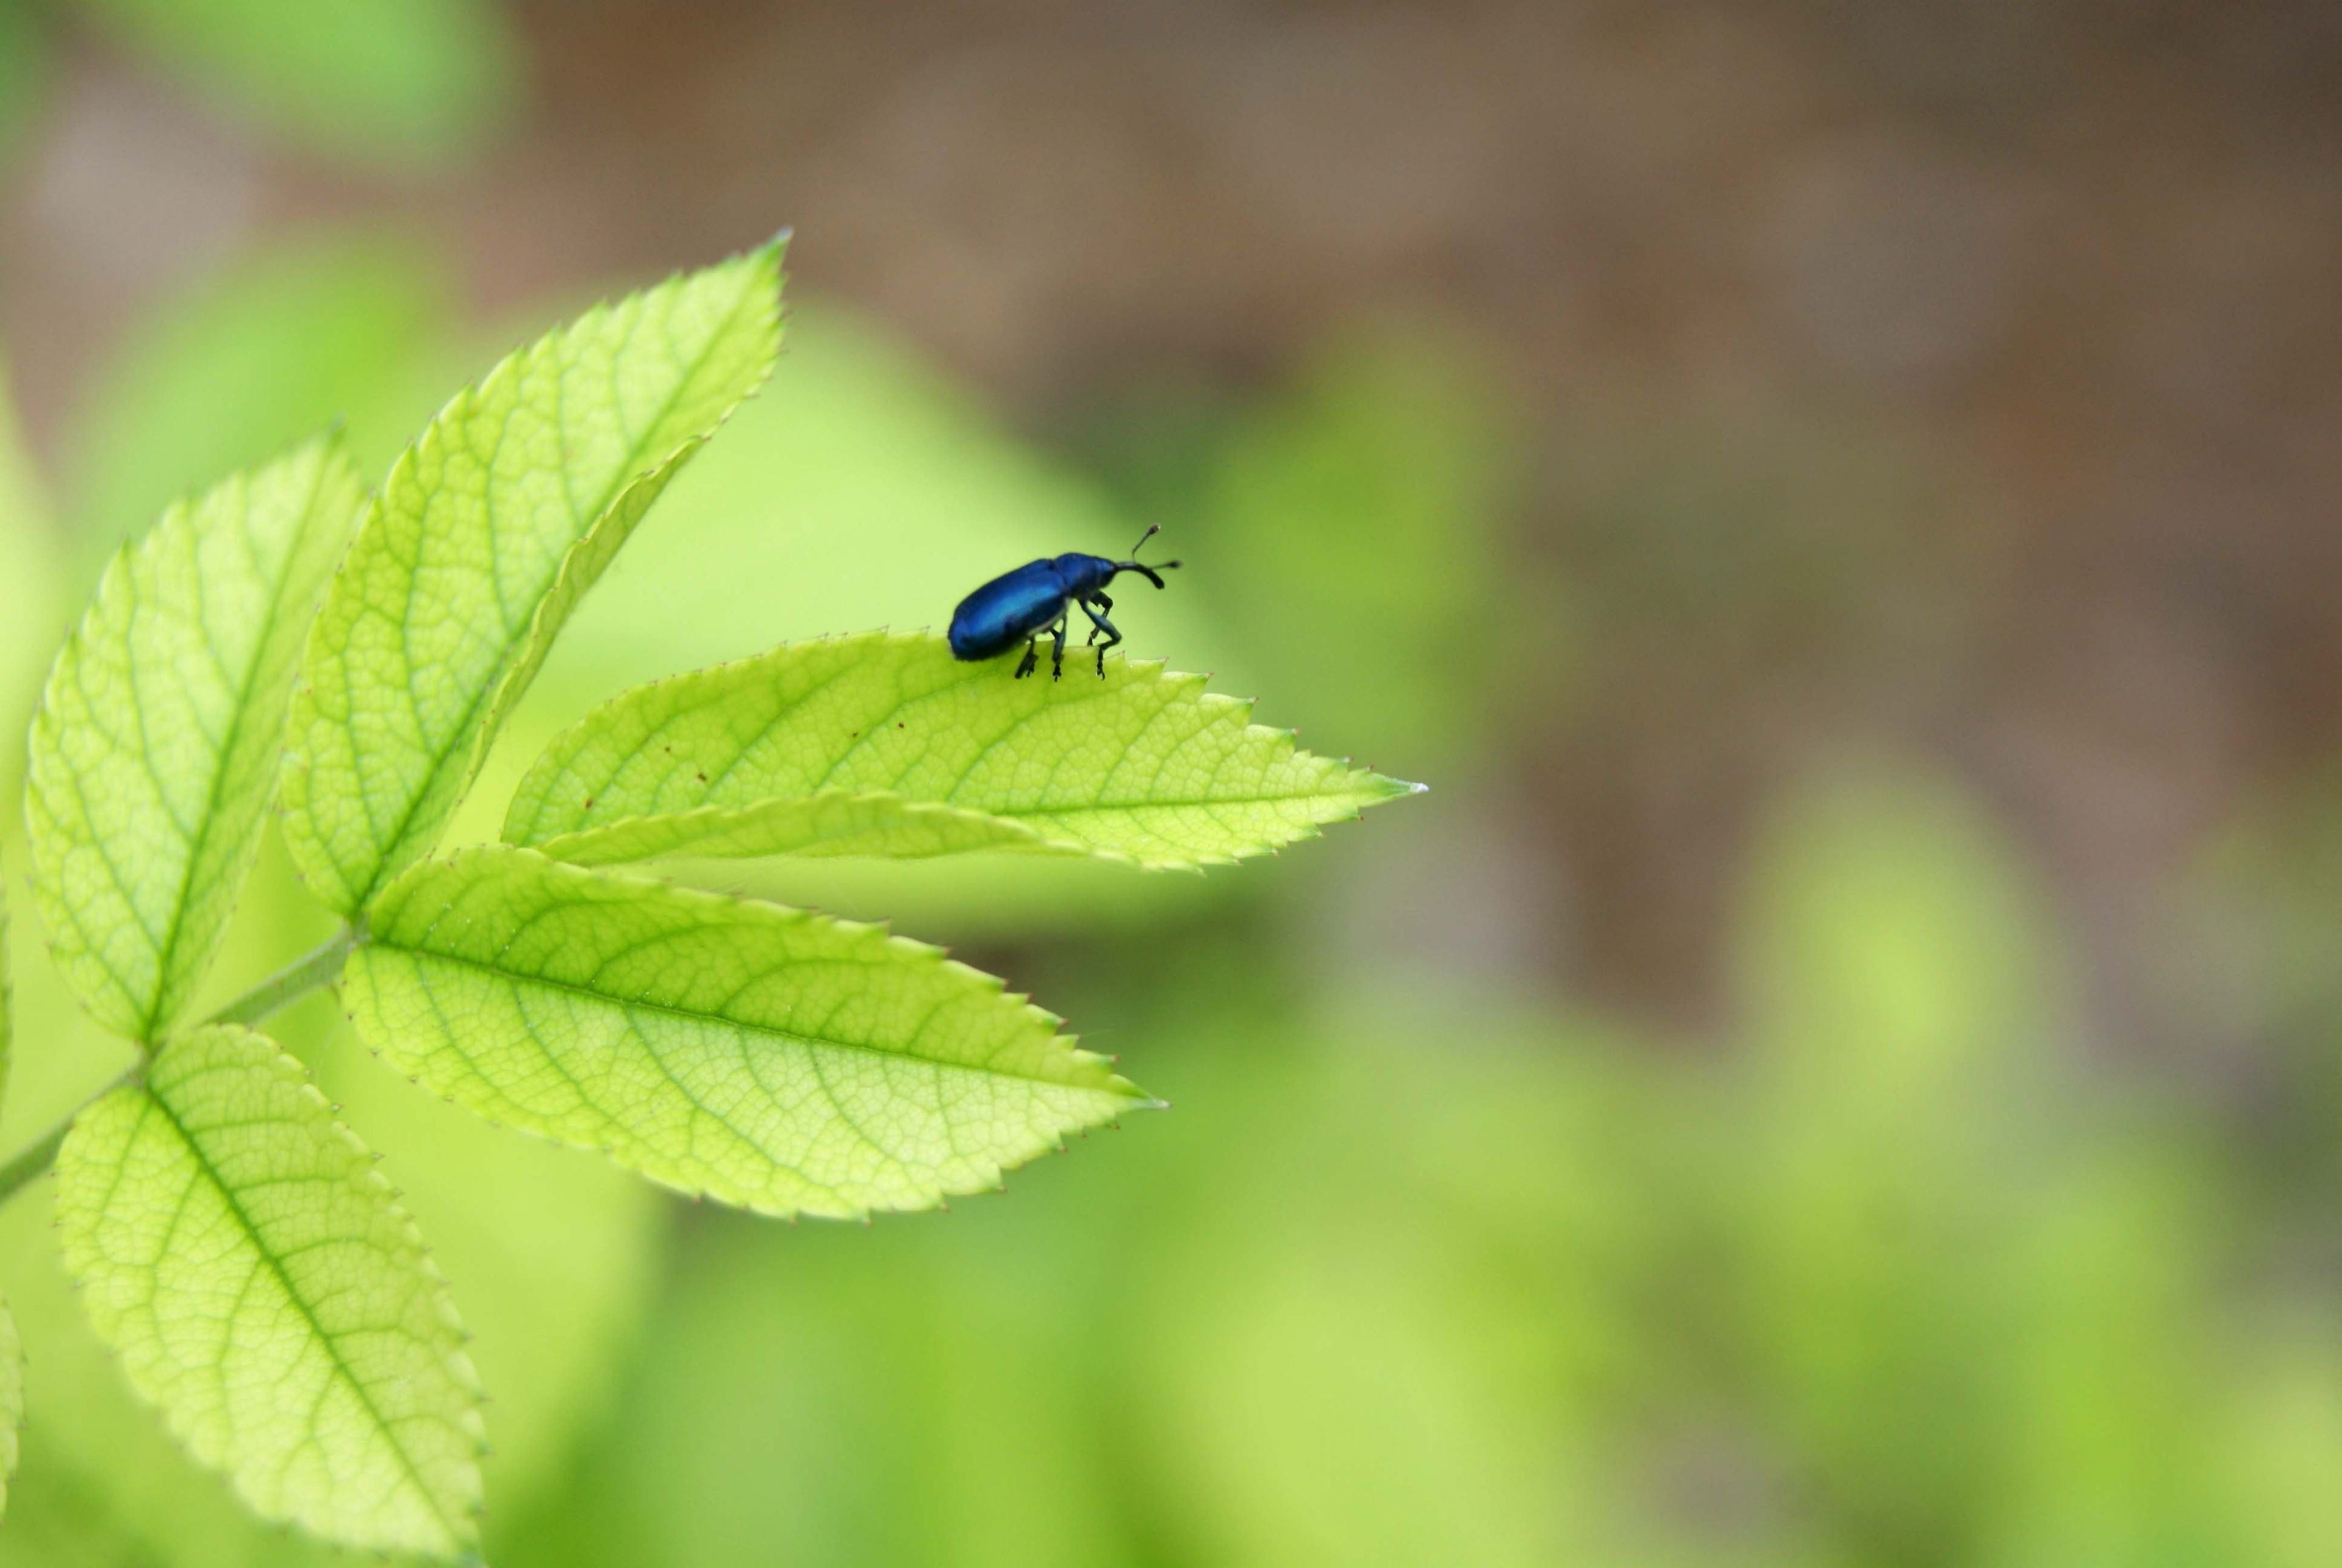 A beetle perched on a leaf.